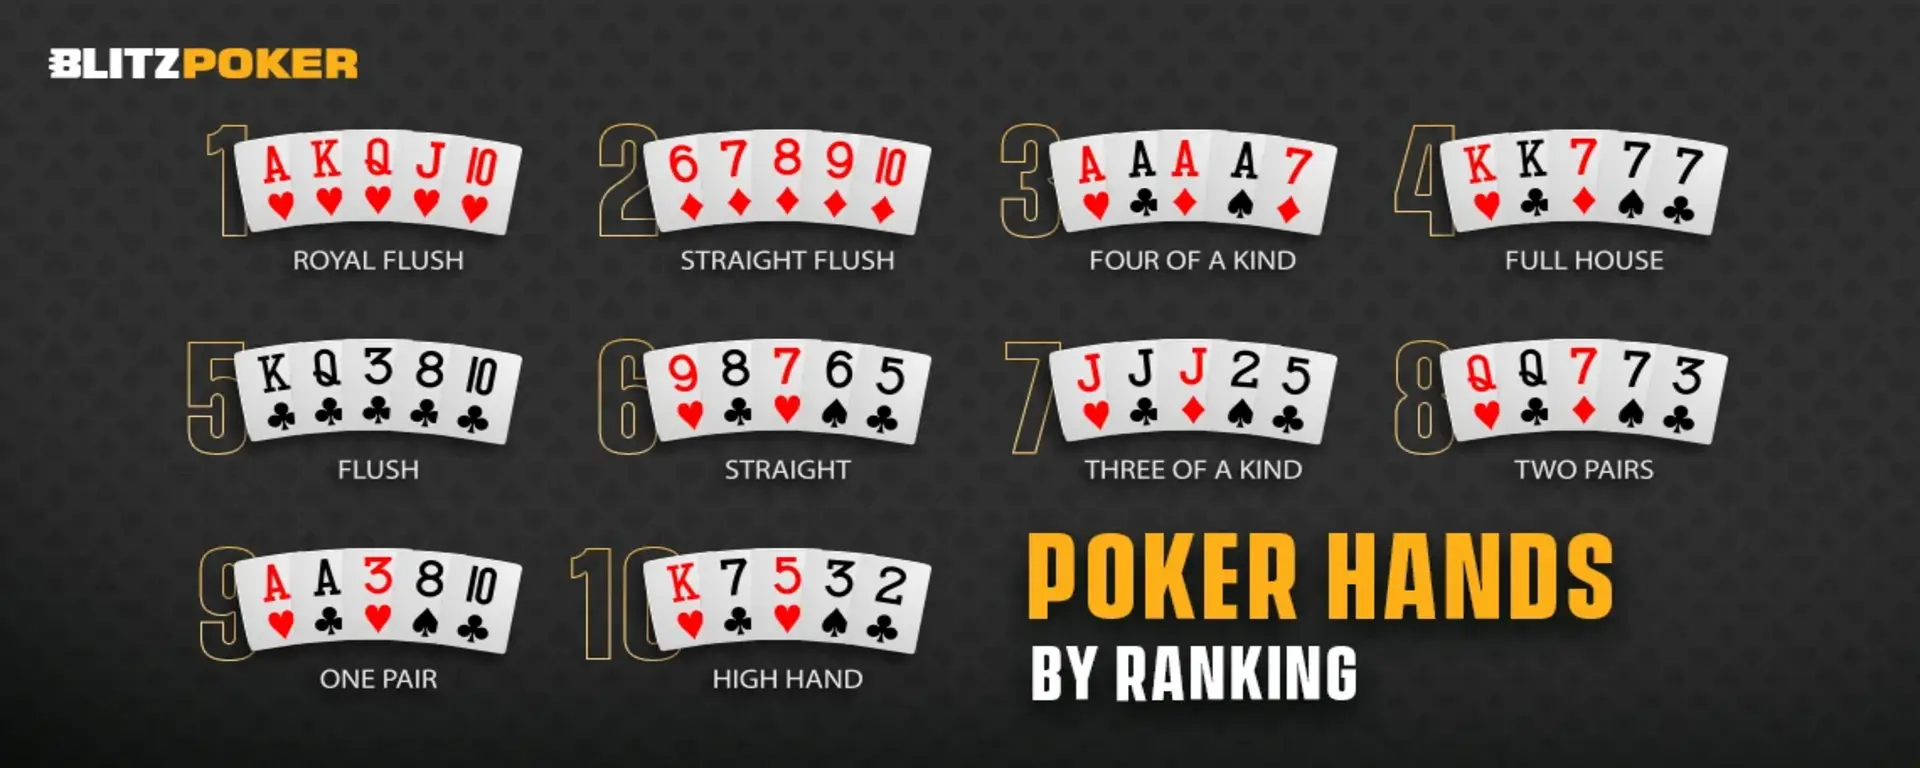 Poker Hands by Ranking | Poker Hands Ranked Best to Worst